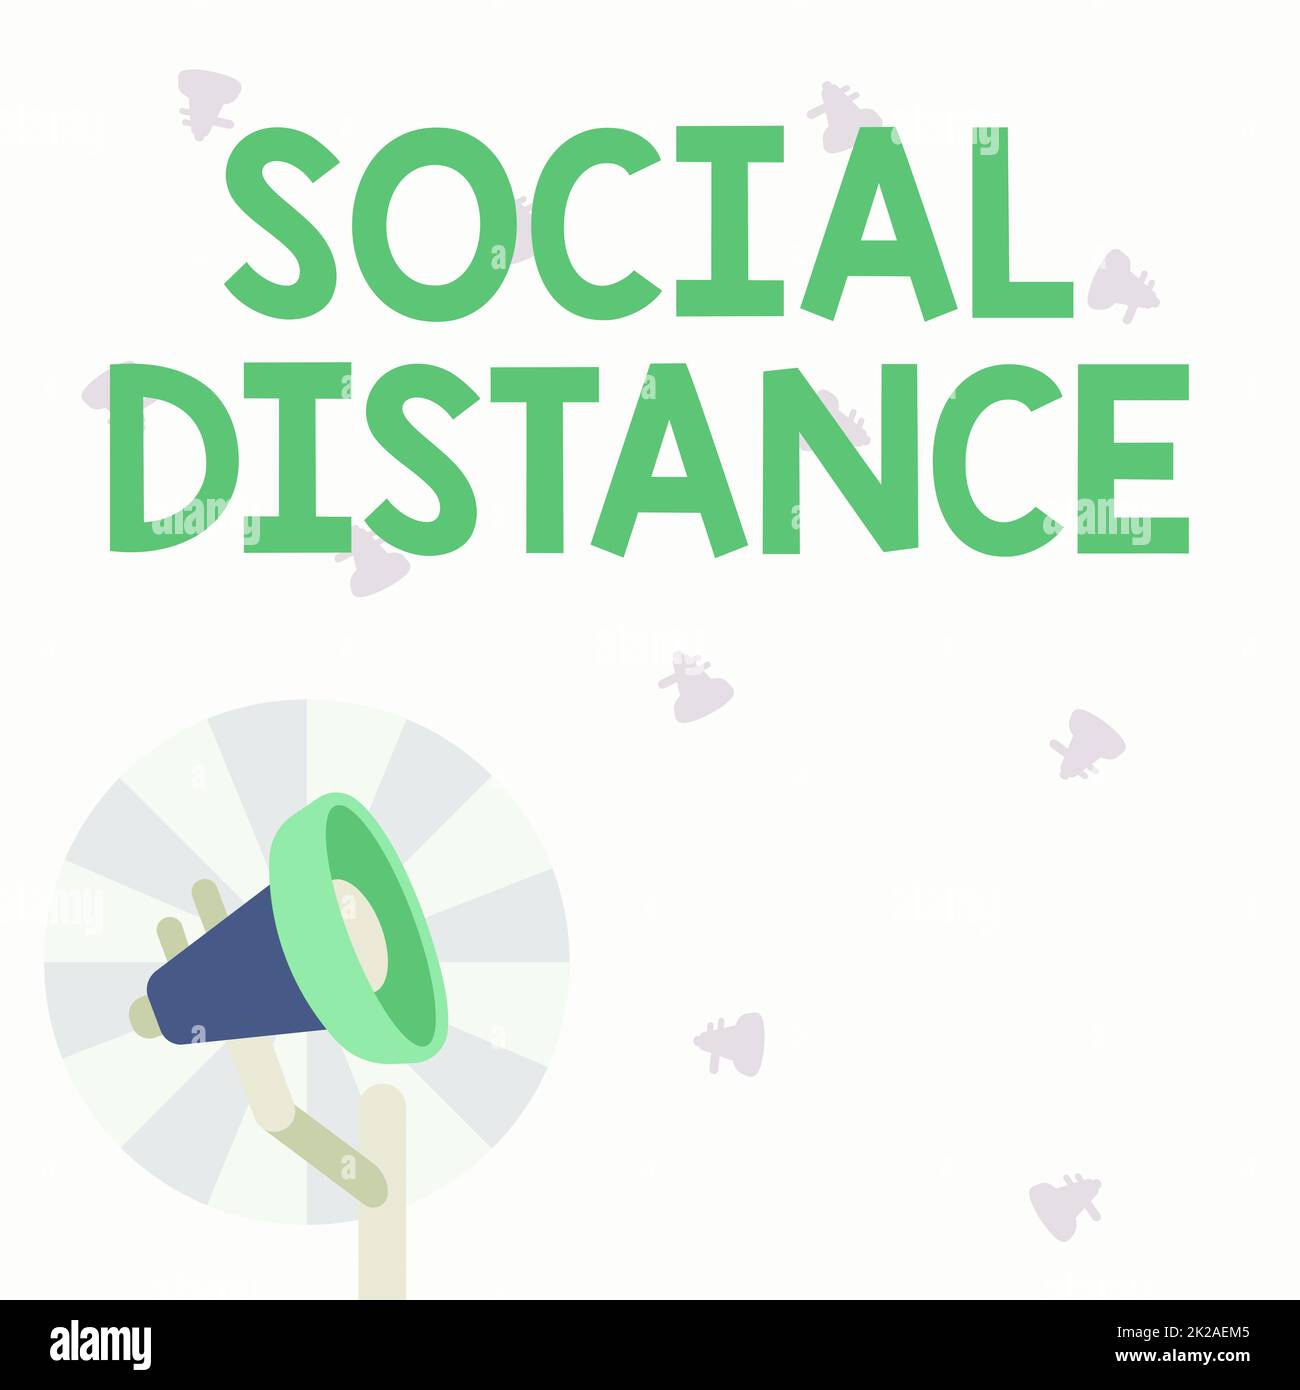 Text caption presenting Social Distance. Business approach maintaining a high interval physical distance for public health safety Illustration Of Pole Megaphone With Sun Raises Making Announcements. Stock Photo